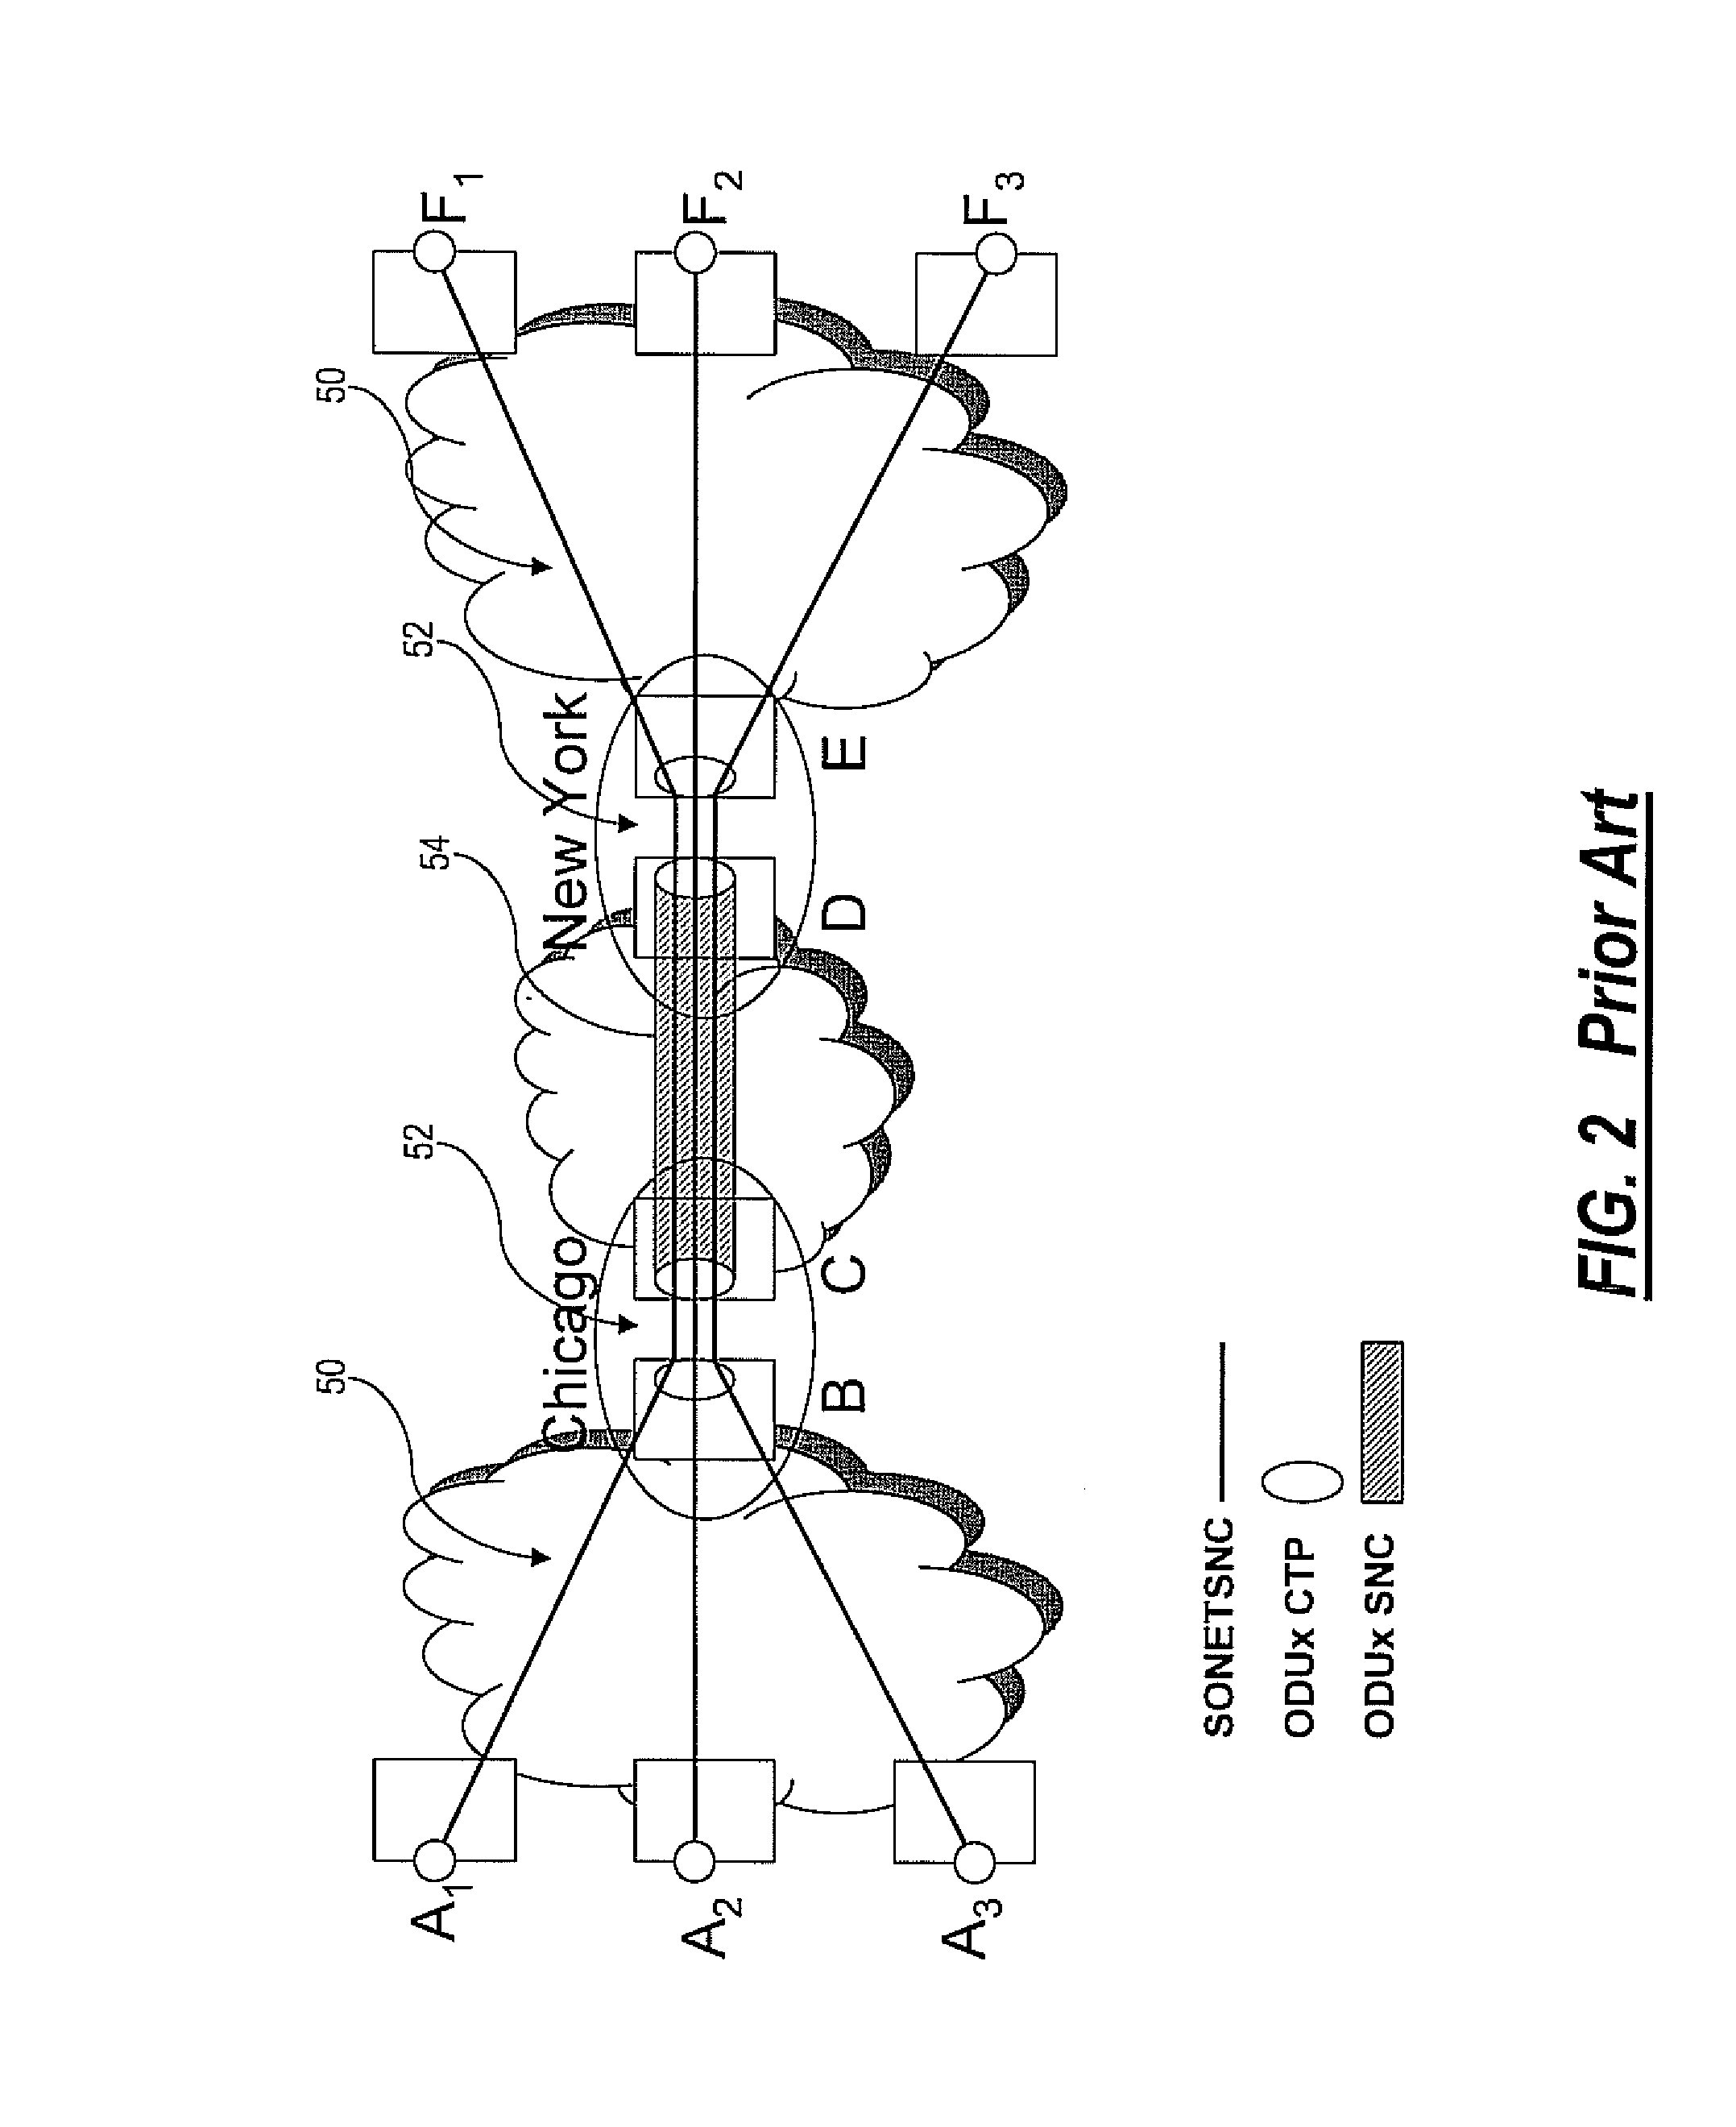 Methods and systems for the hierarchical mesh restoration of connections in an automatically switched optical network